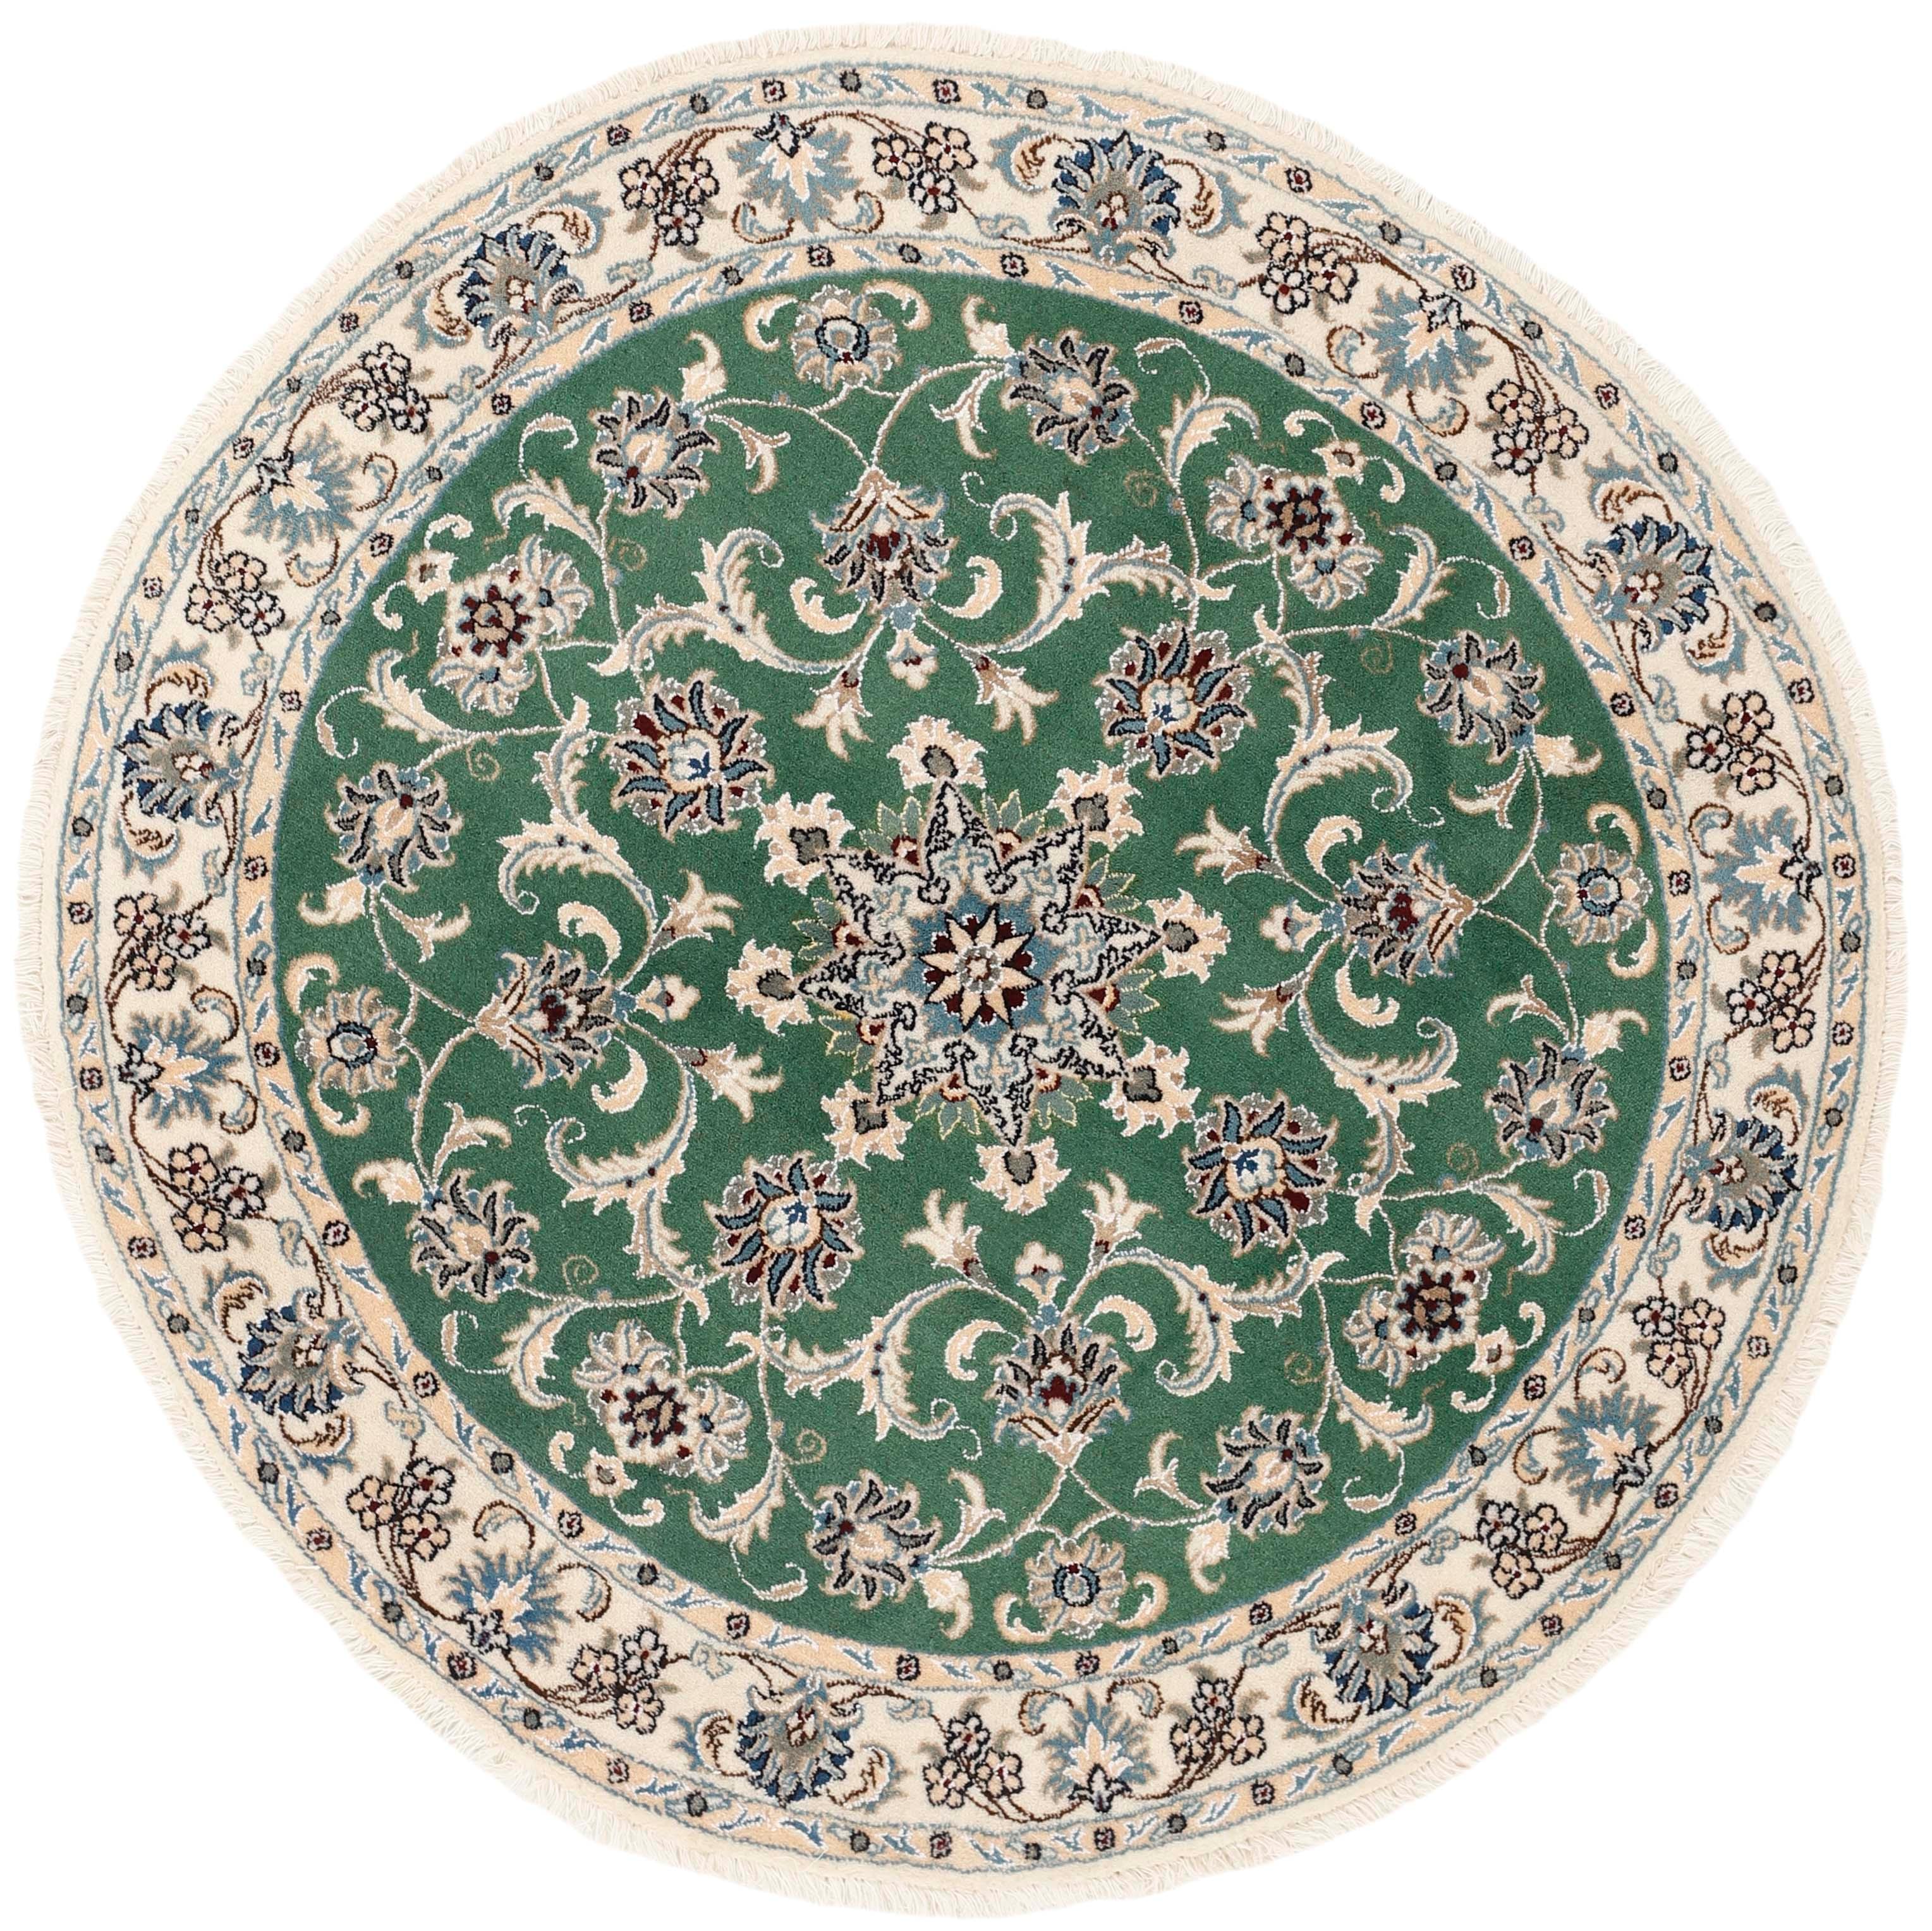 Authentic persian circle rug with a traditional floral design in green, beige and brown